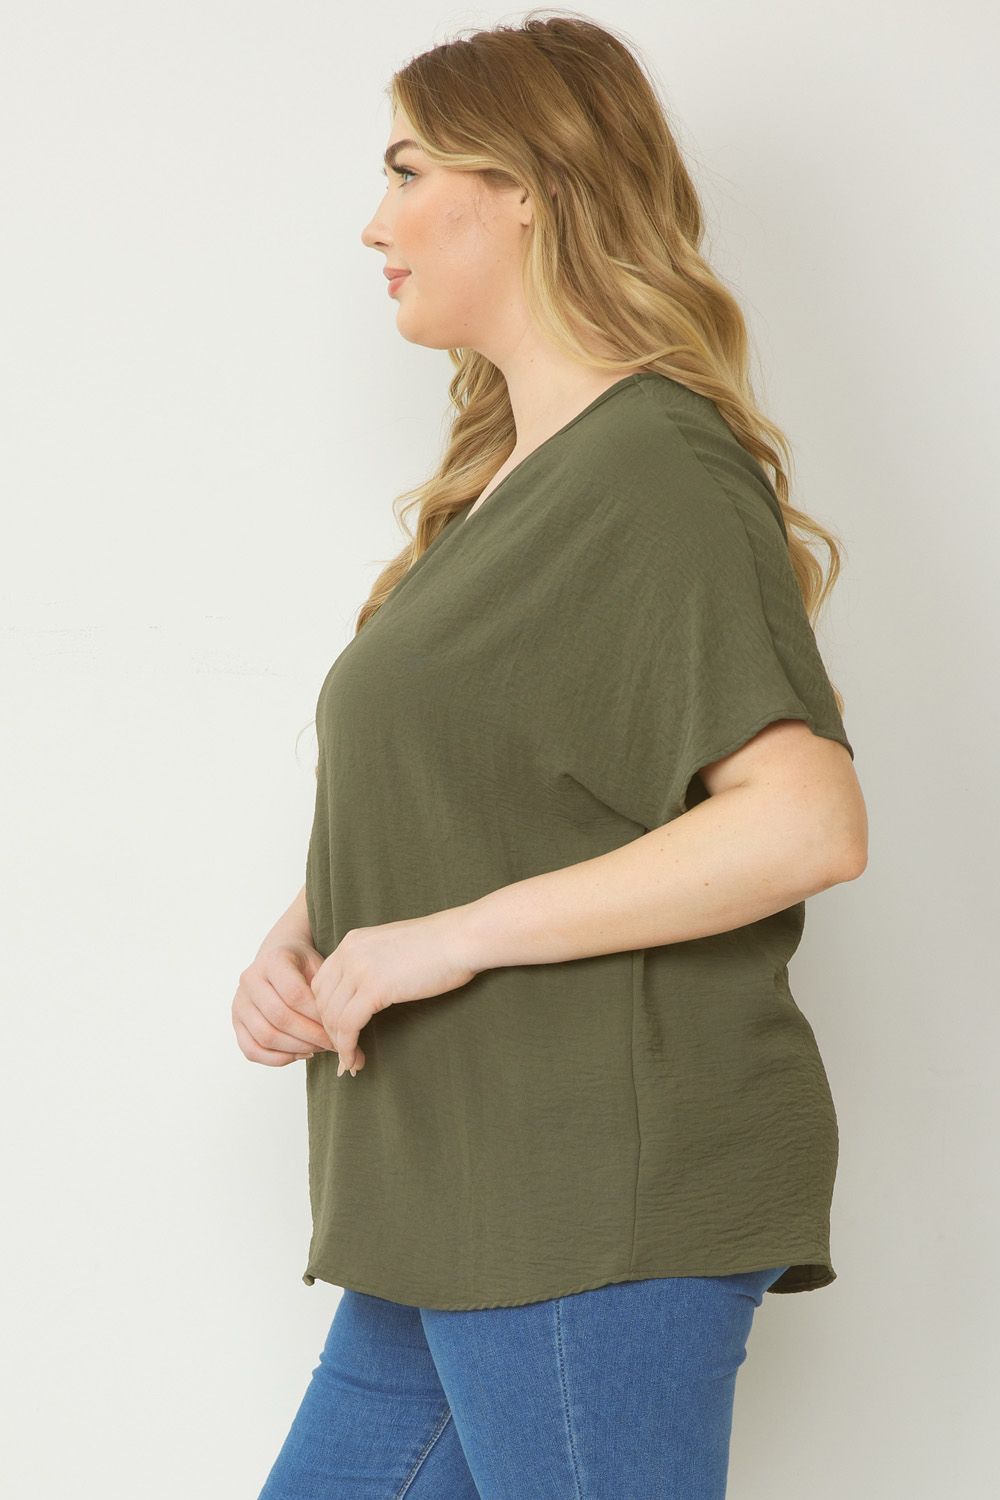 "Everyday Charm" Top (Olive) - Happily Ever Aften